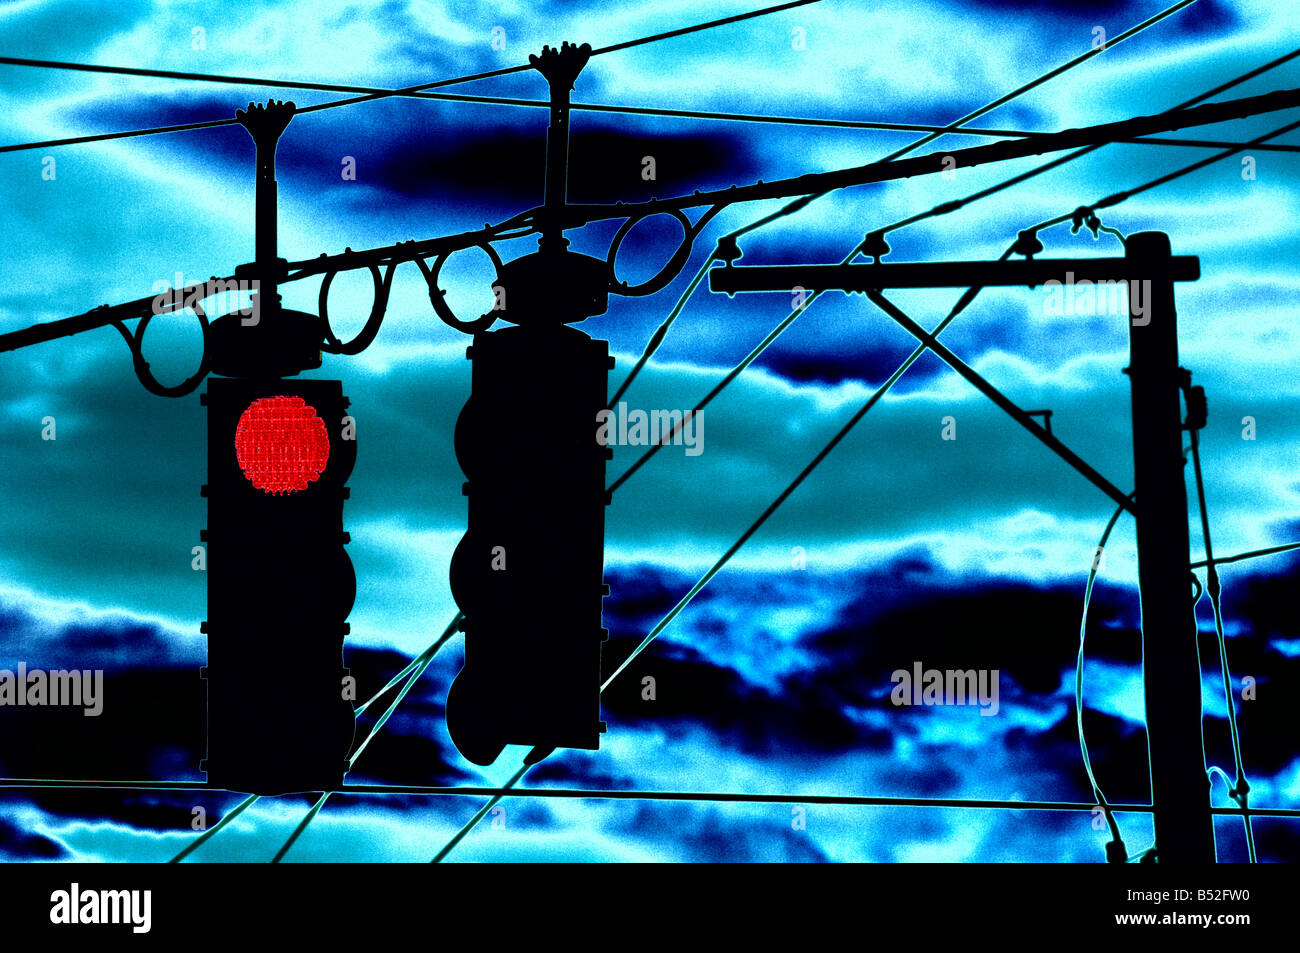 digitally altered red traffic stop lights at night Stock Photo